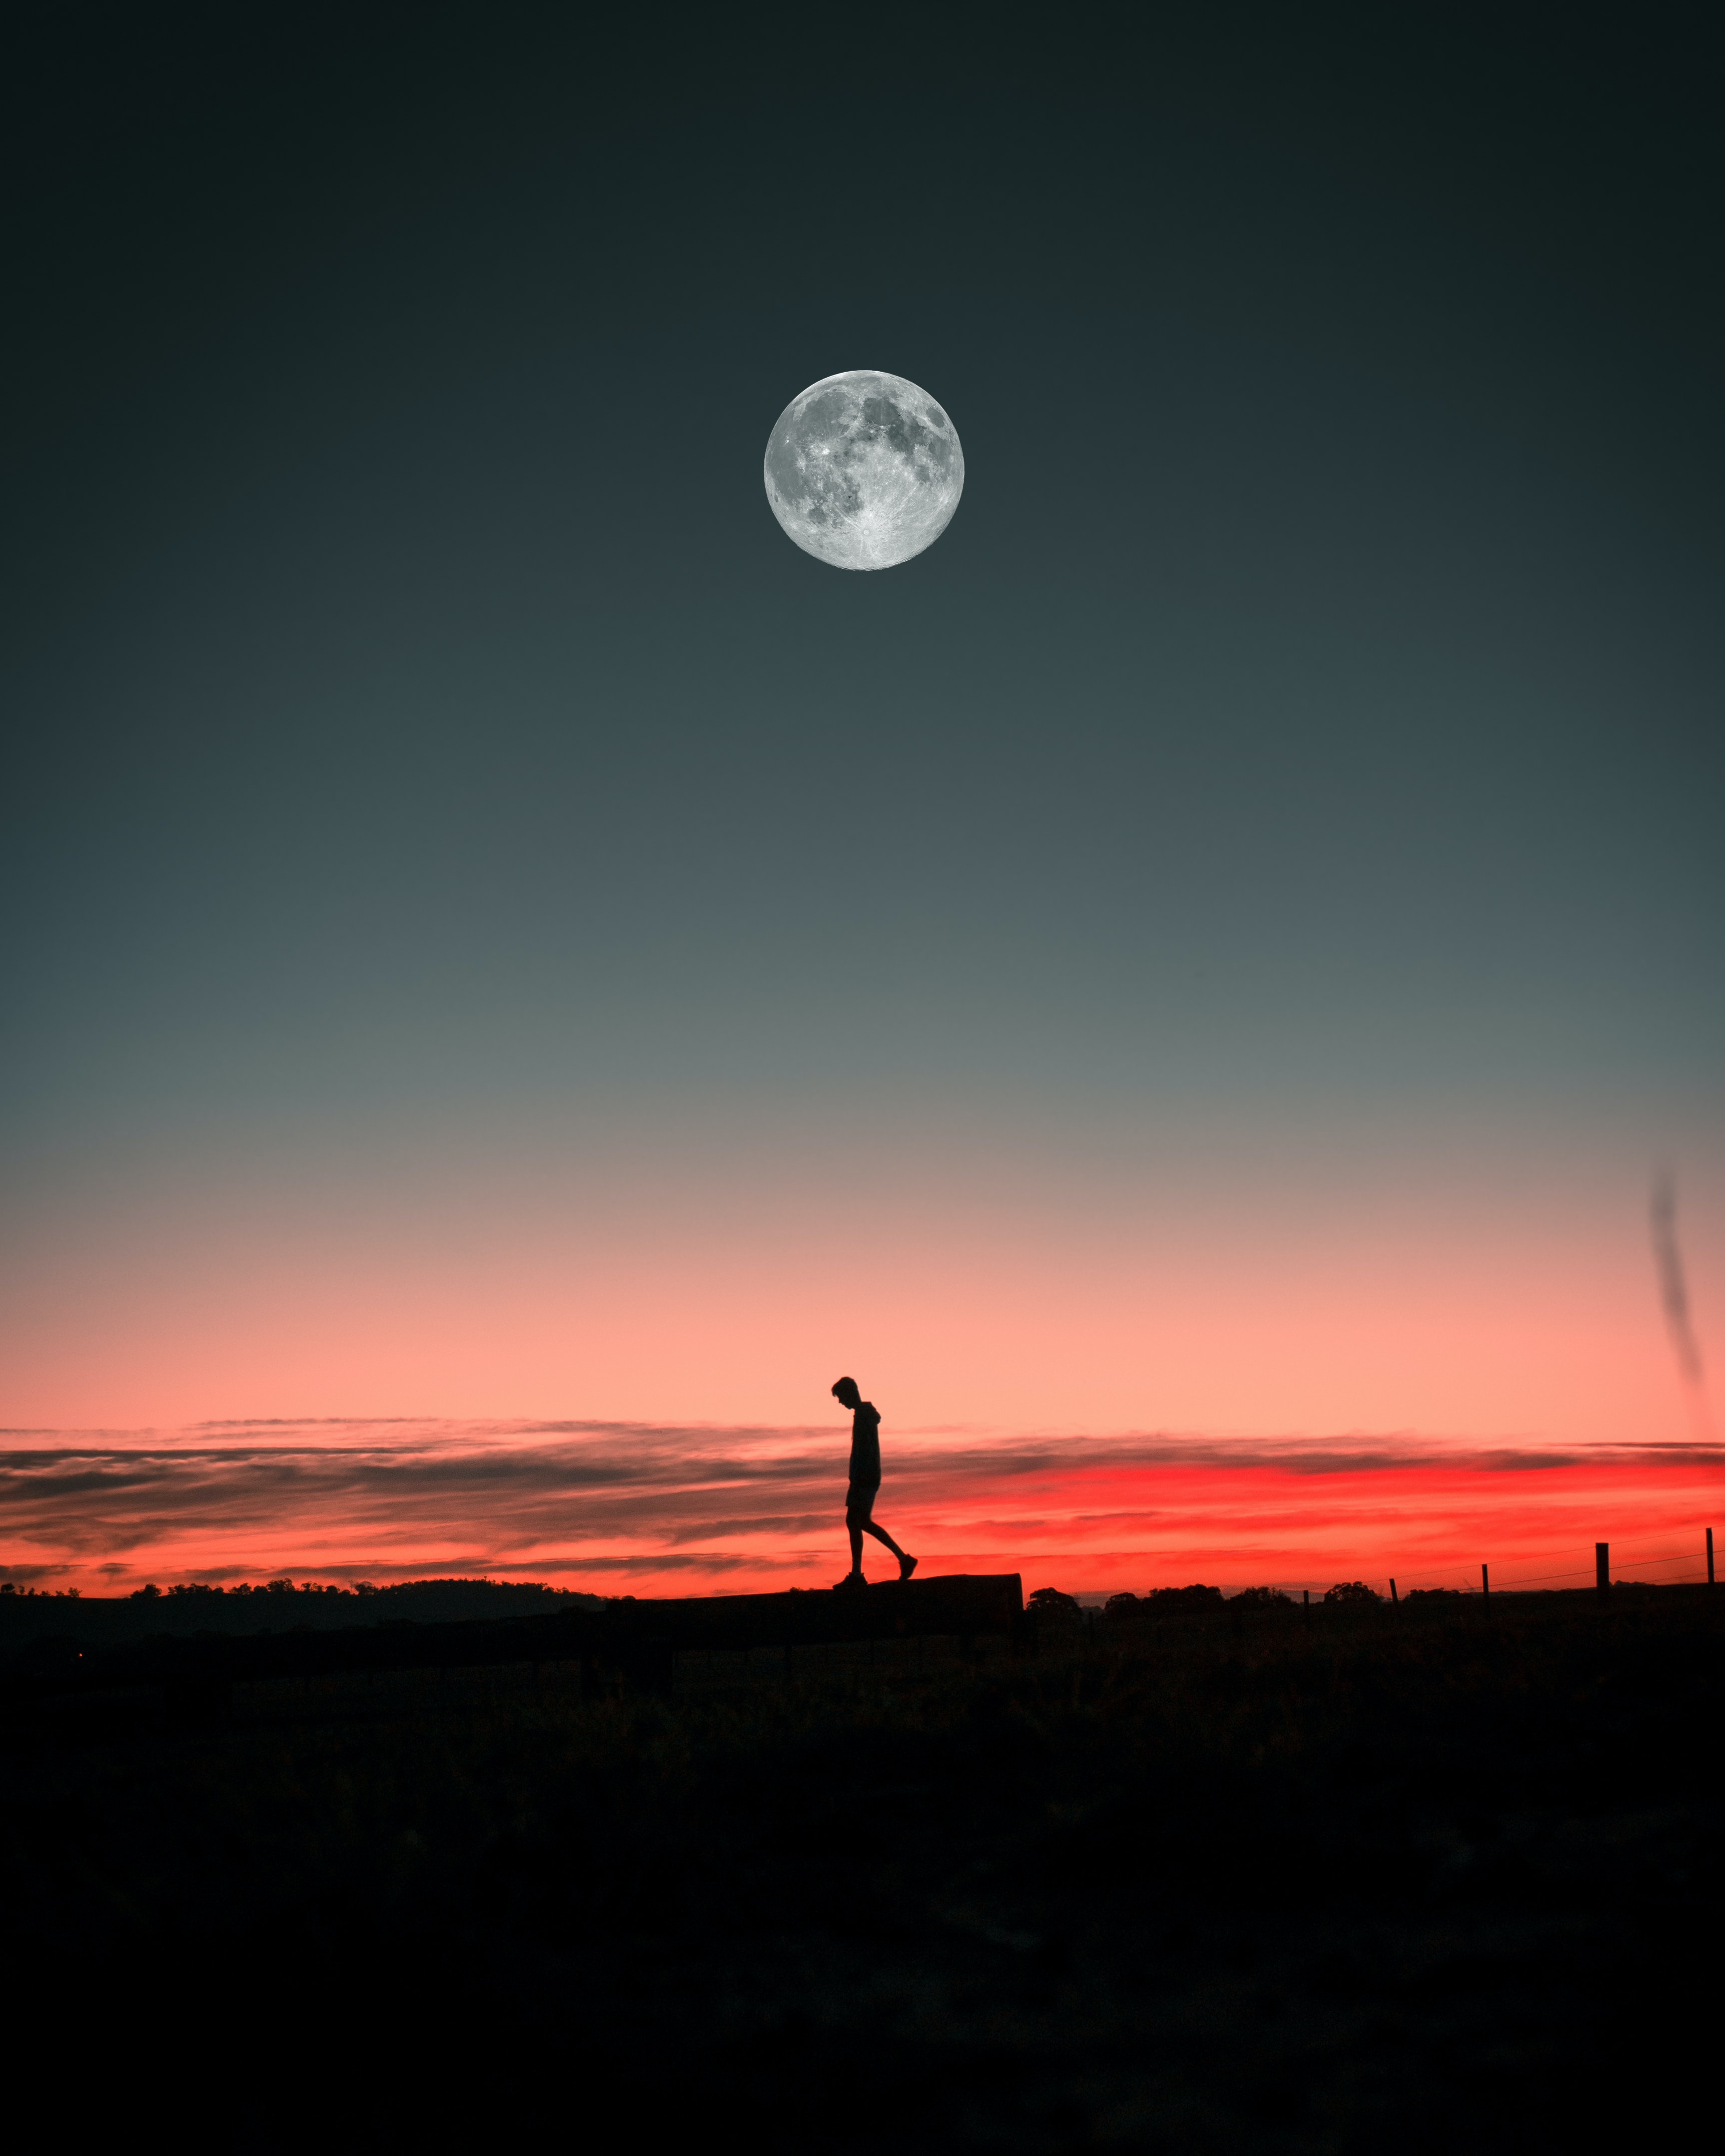 alone, moon, lonely, silhouette, loneliness, sunset, miscellanea, miscellaneous